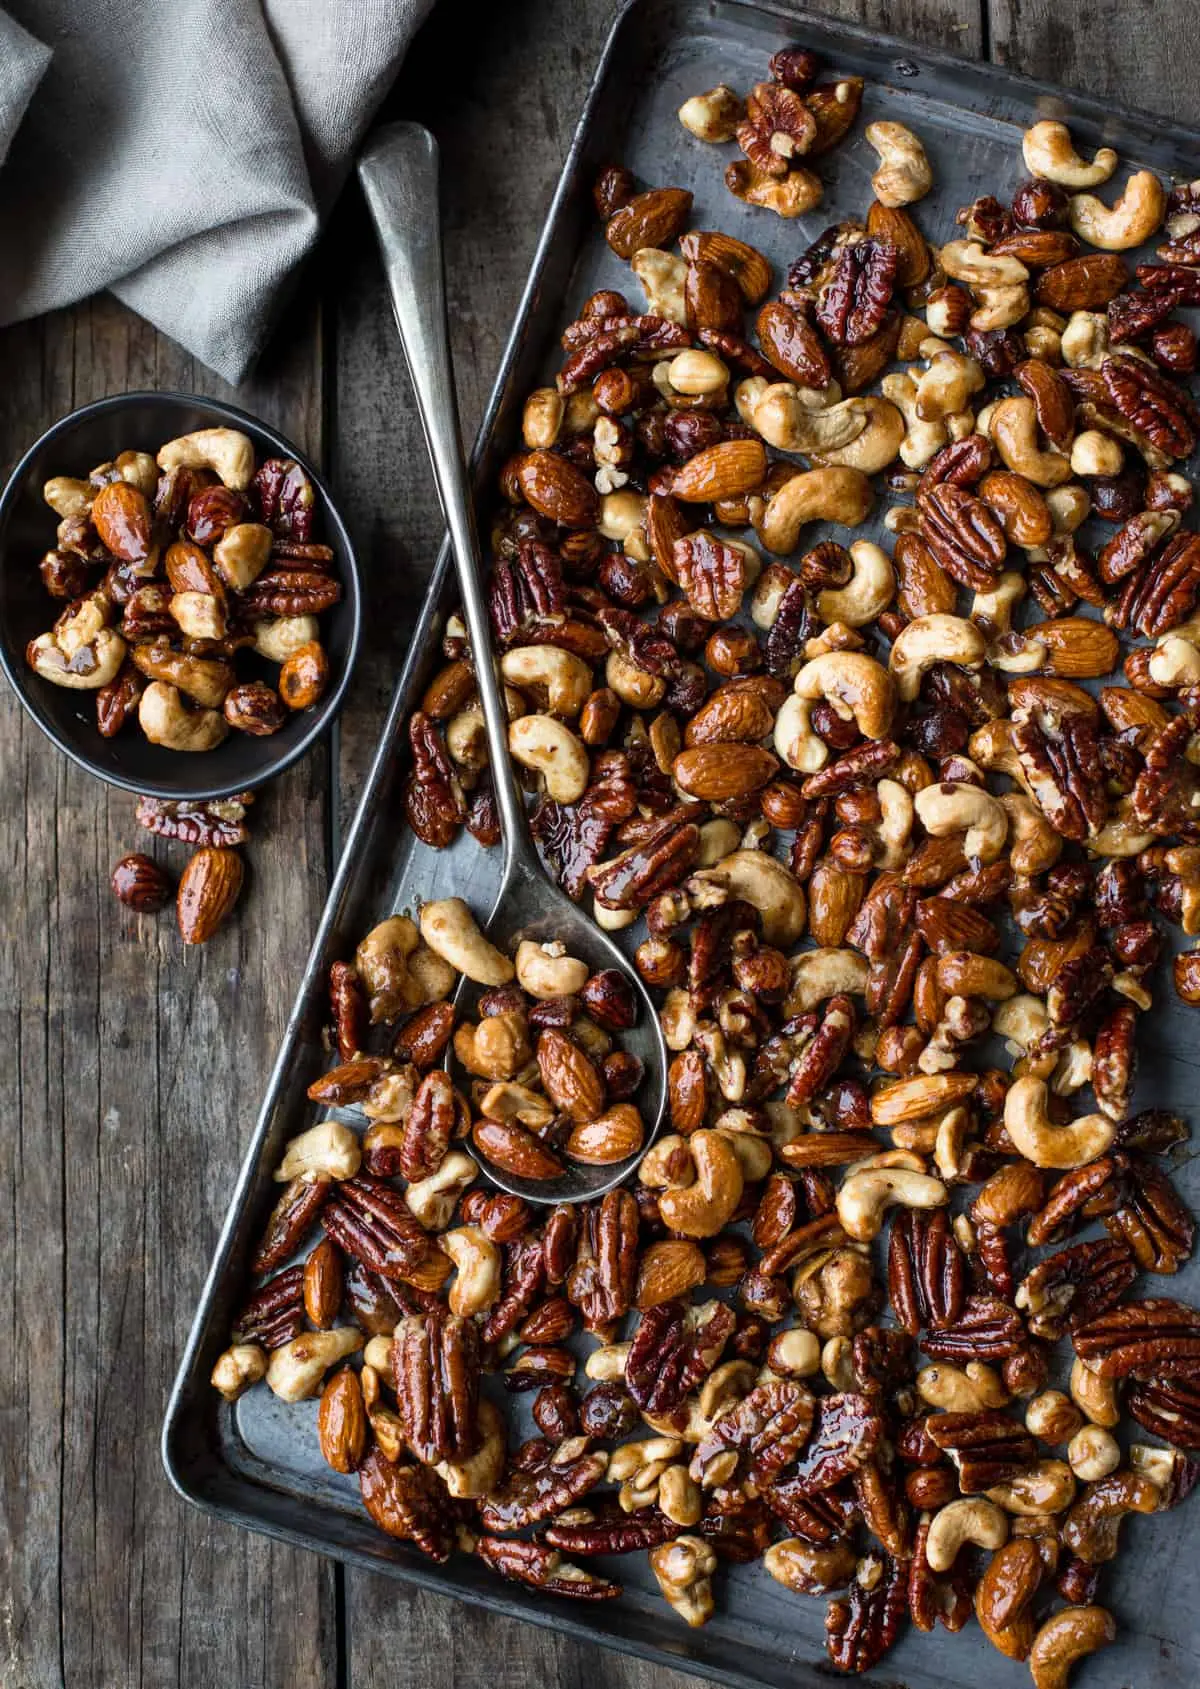 smoked nuts - Are smoked nuts healthy